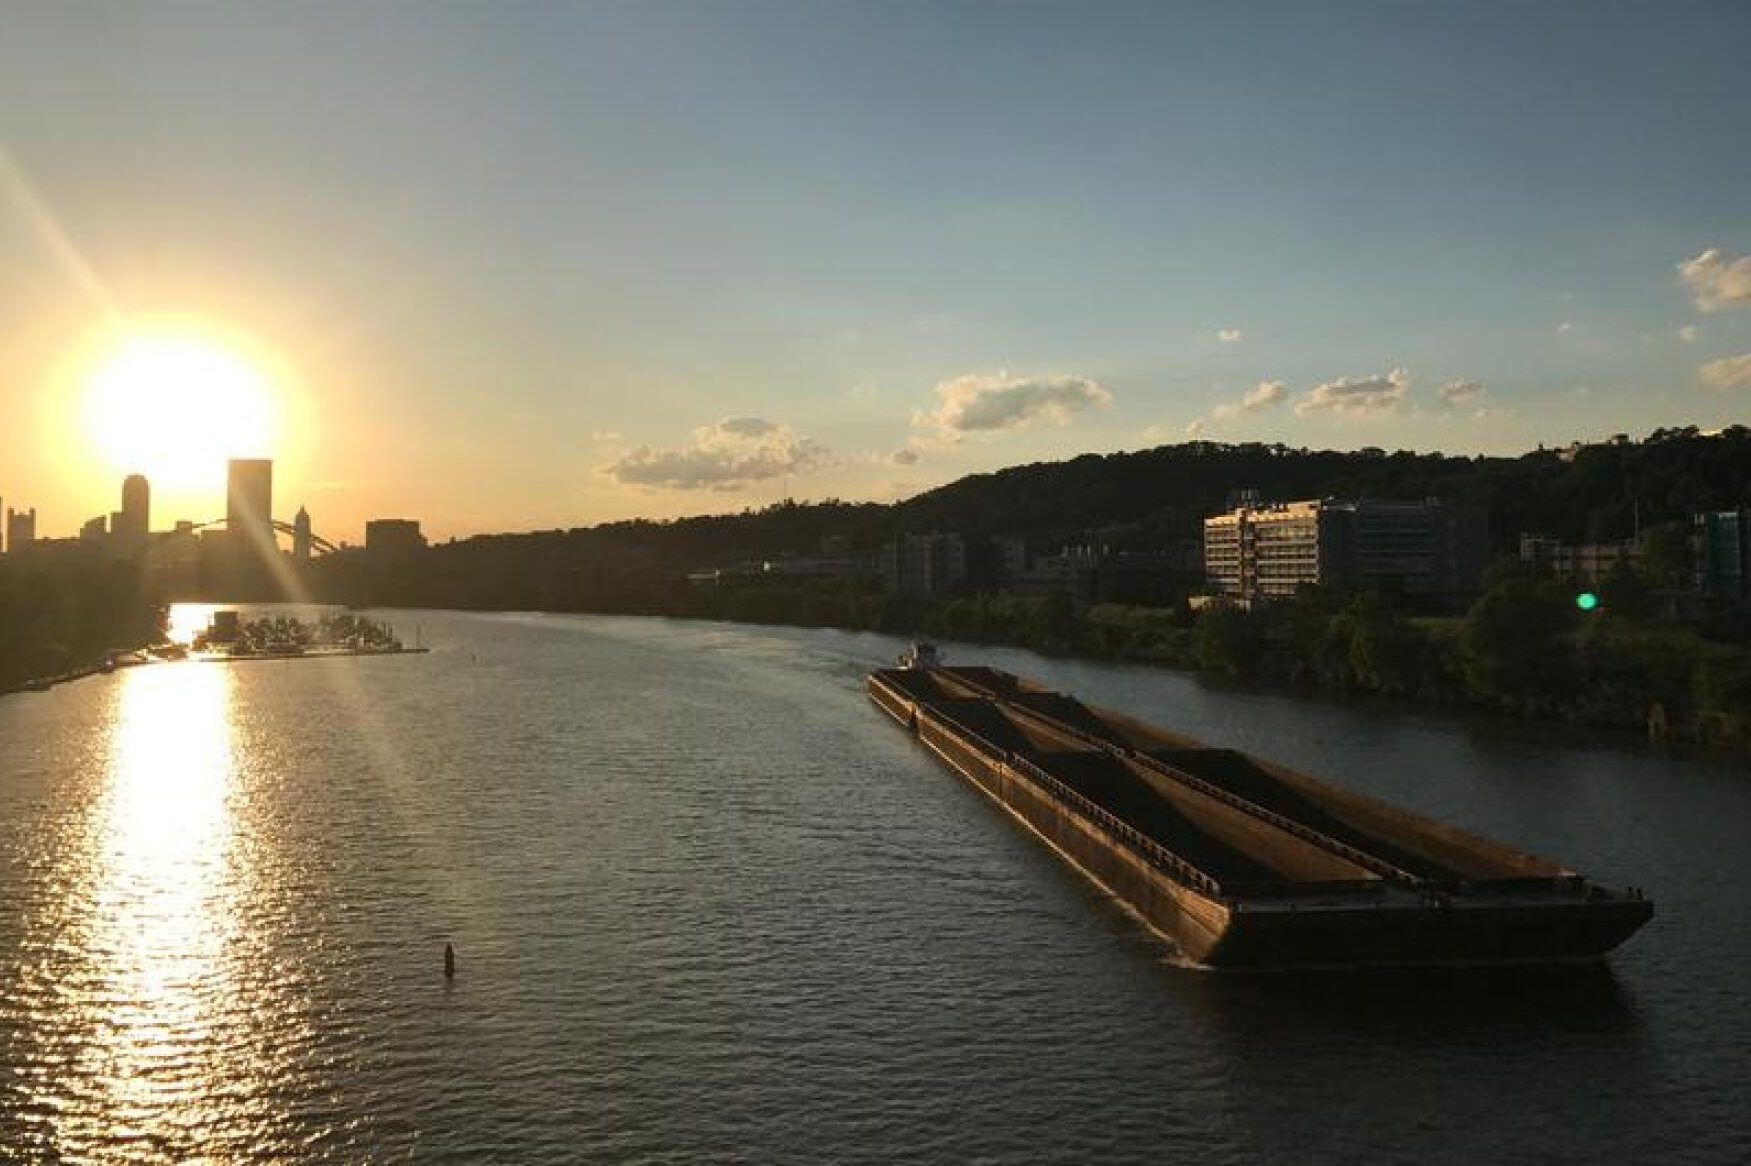 Ohio River with a barge